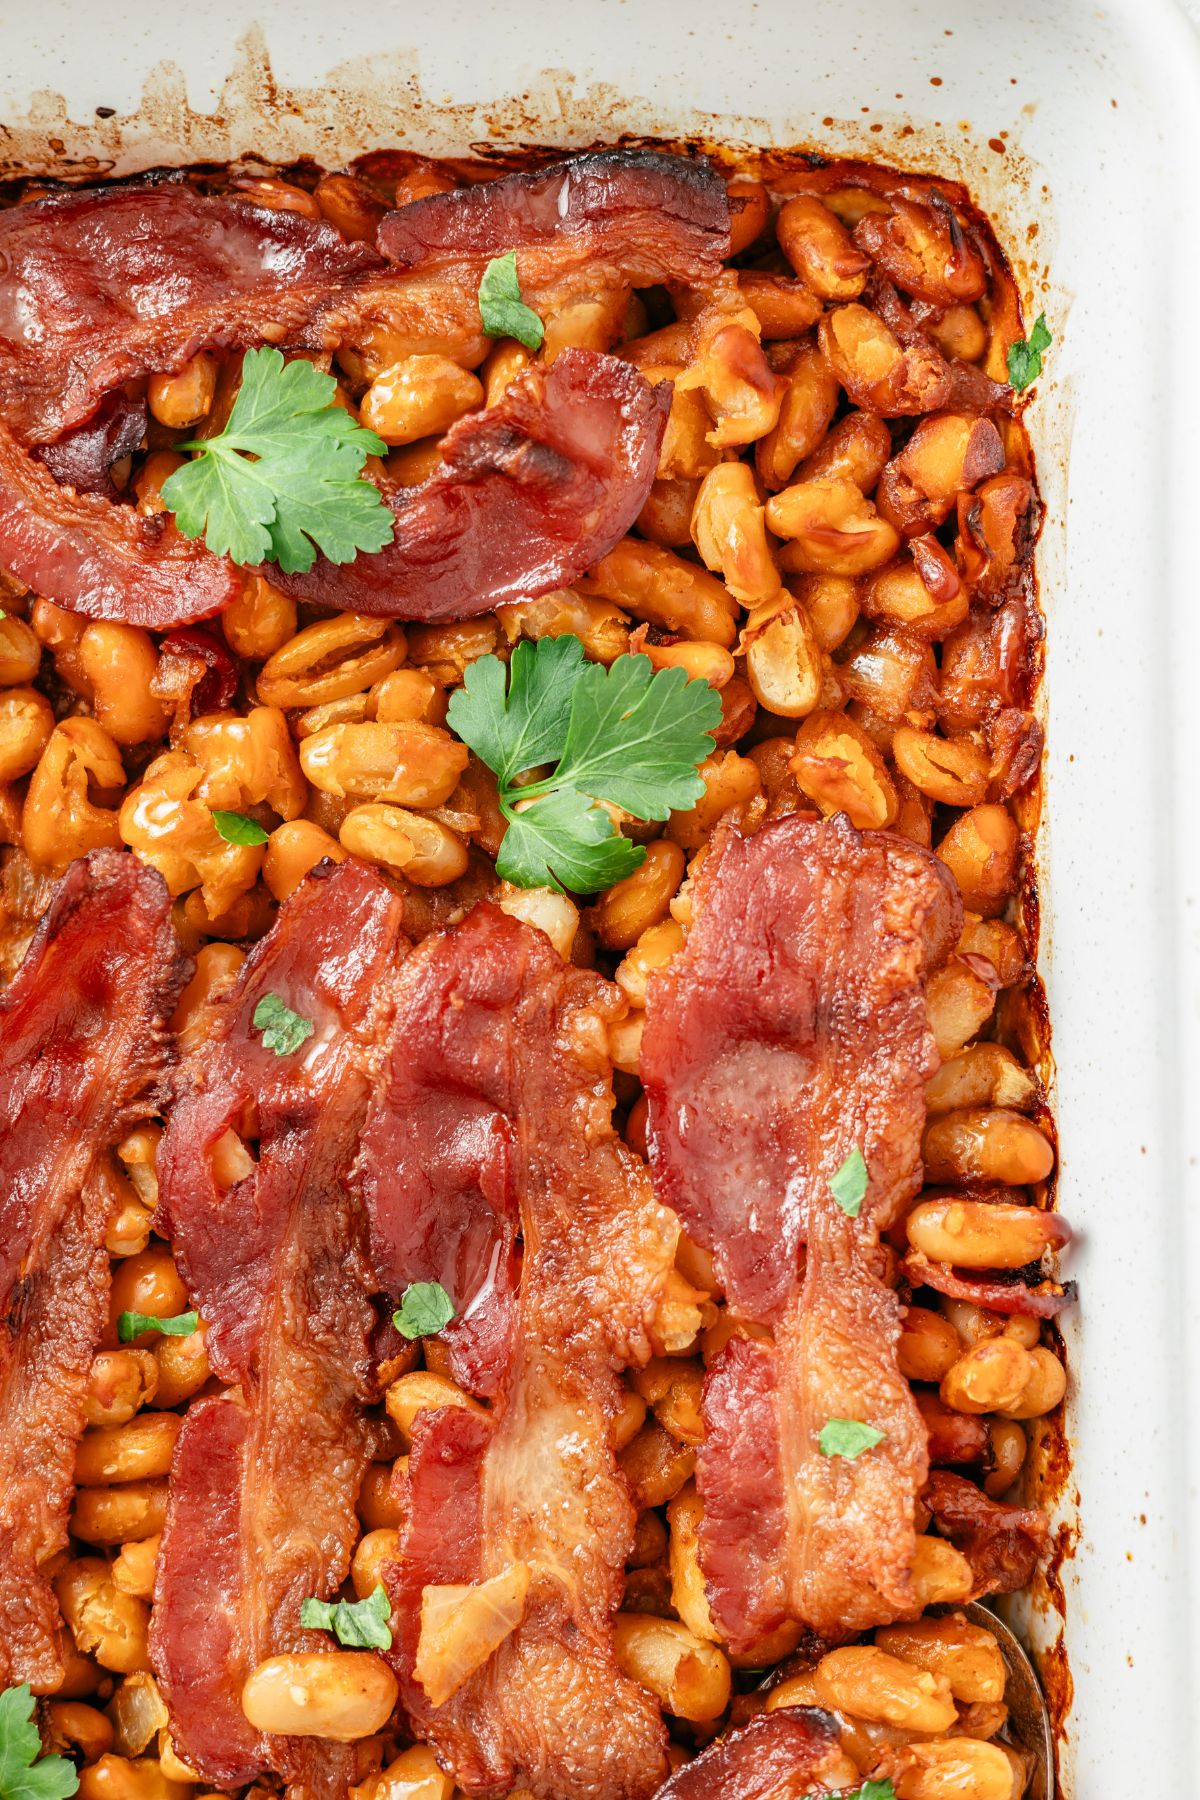 Baked beans in a baking dish, featuring a delightful blend of canned beans cooked to perfection in a flavorful sauce.